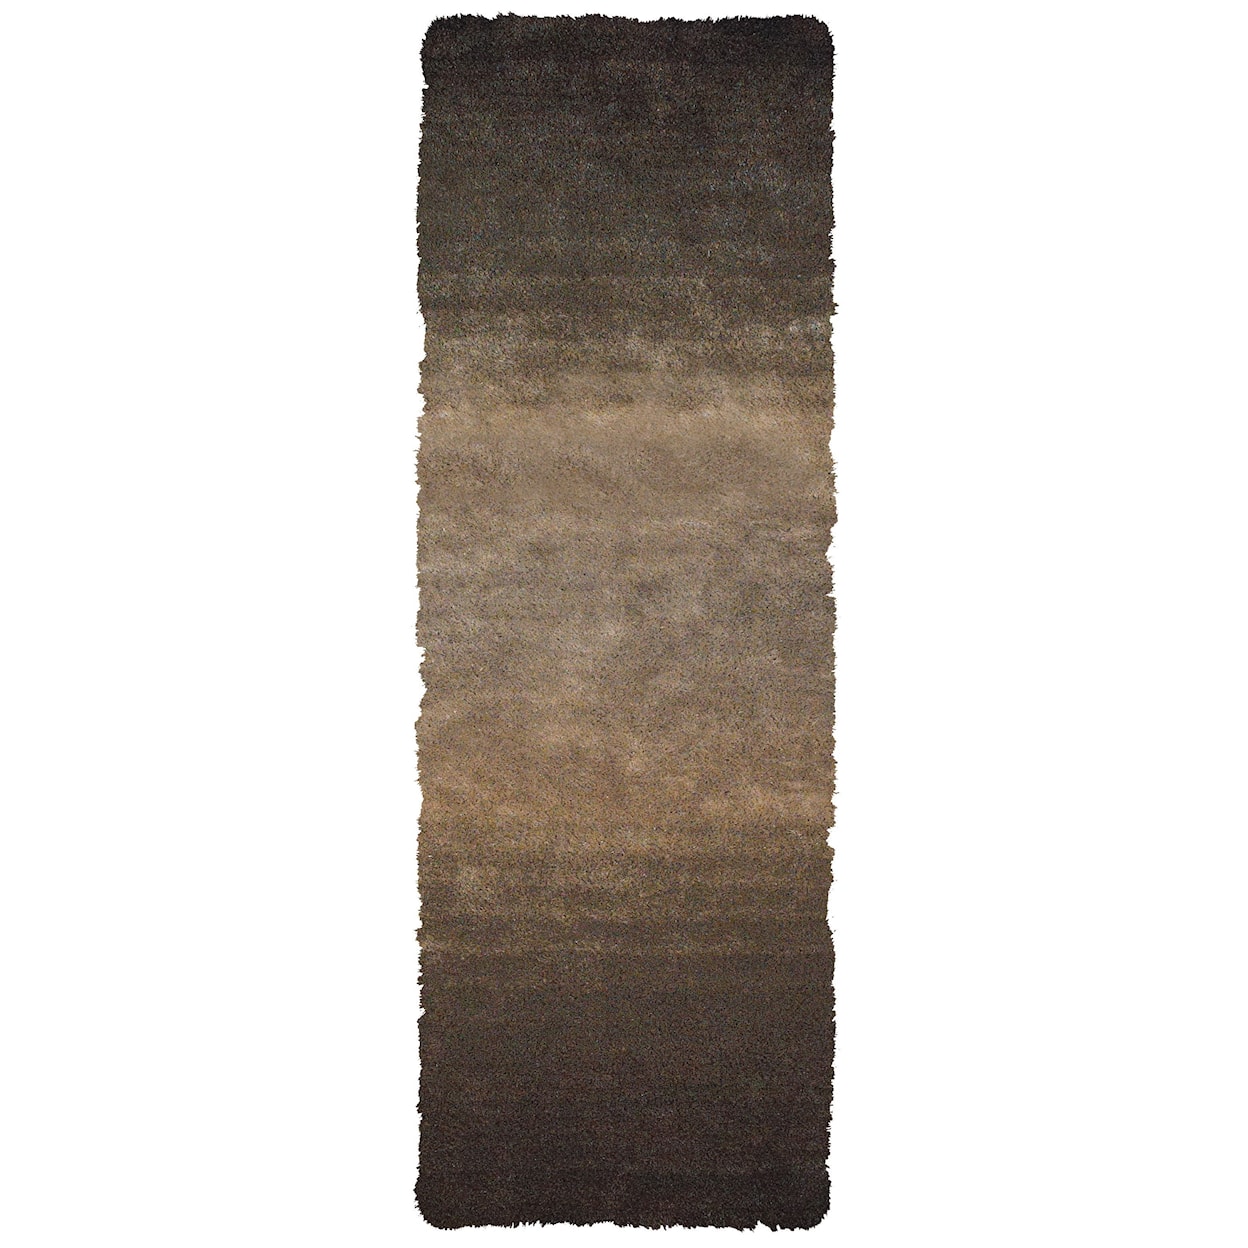 Feizy Rugs Indochine Brown 7'-6" x 9'-6" Area Rug